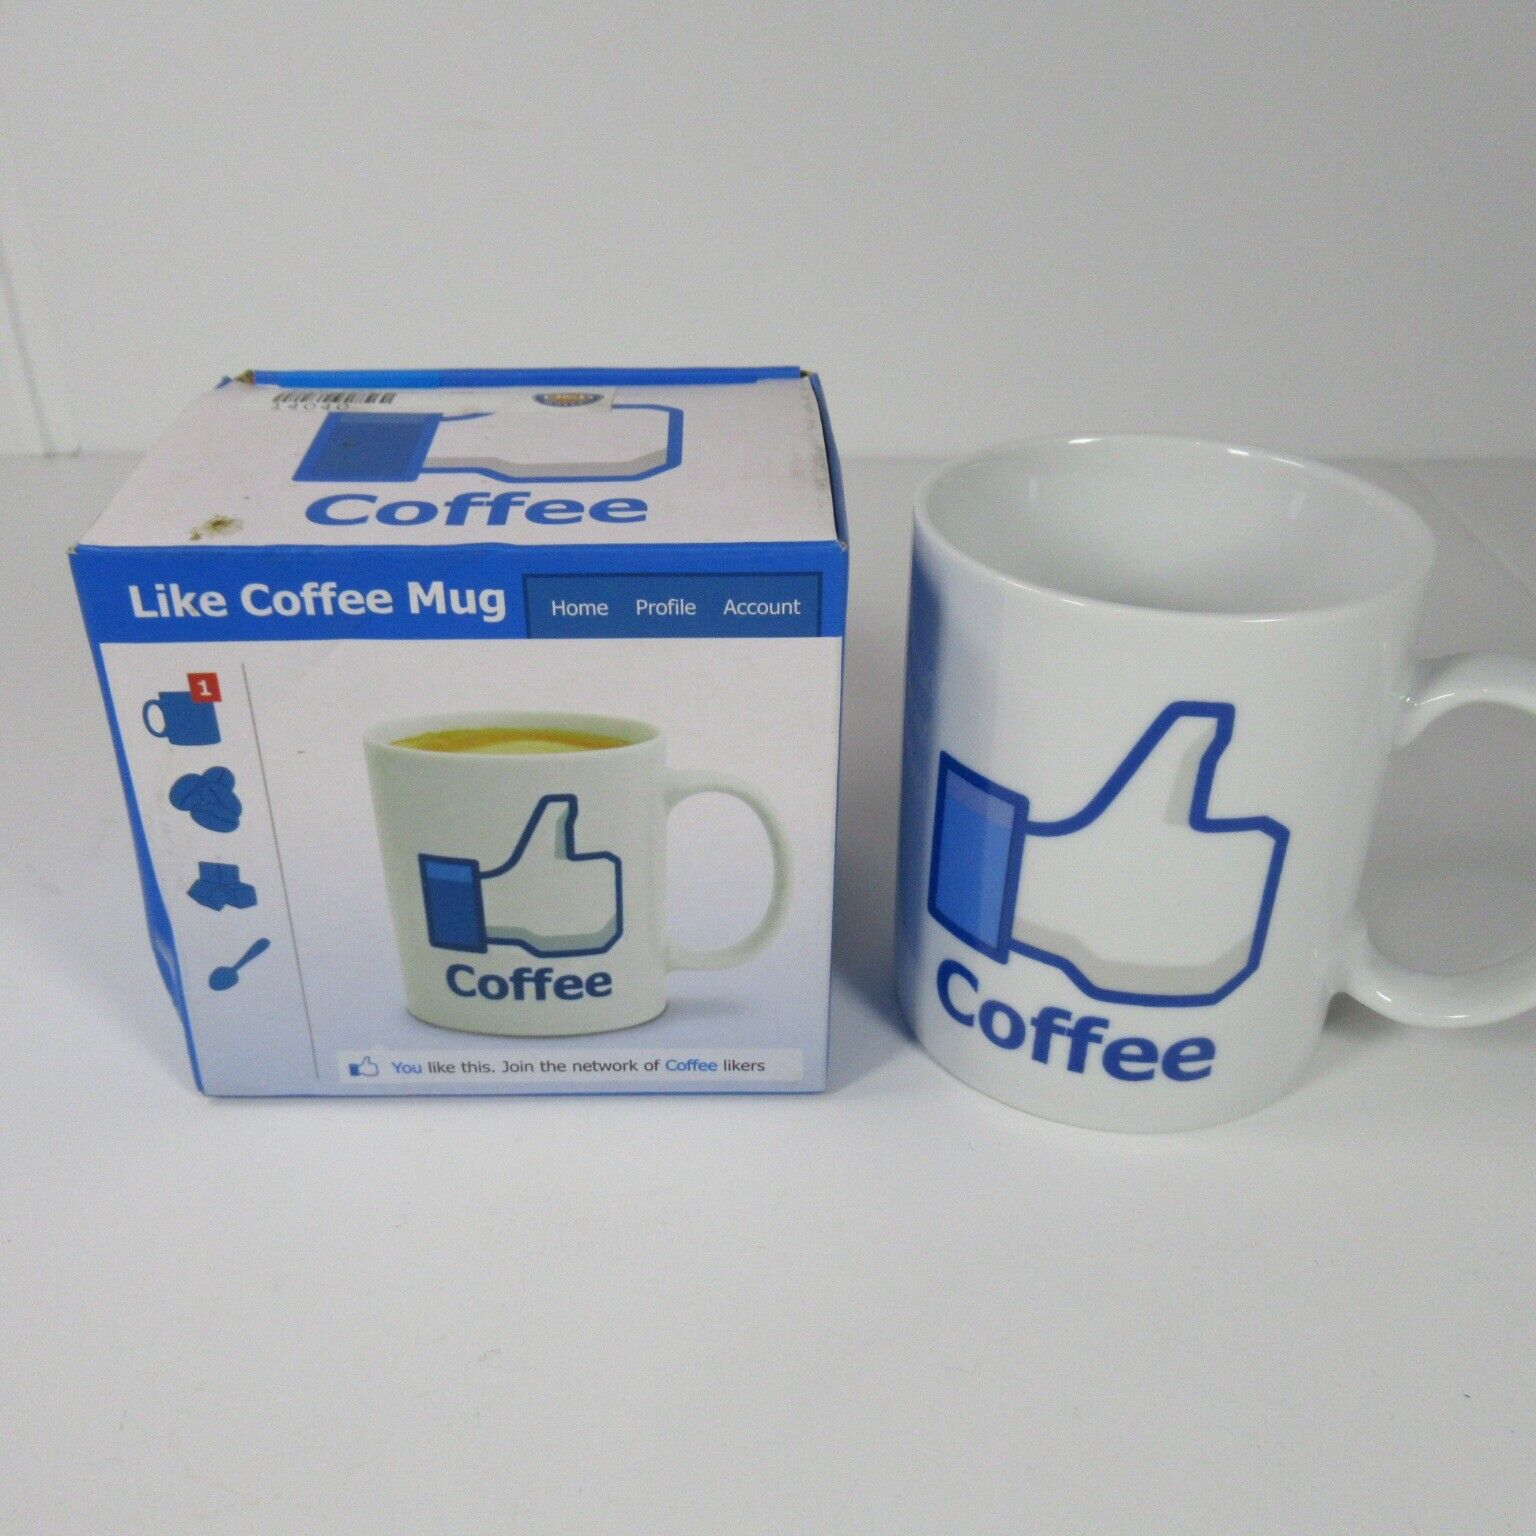 Facebook Social Media Thumbs-Up Icon Double Sided Ceramic Coffee Mug Cup In Box 